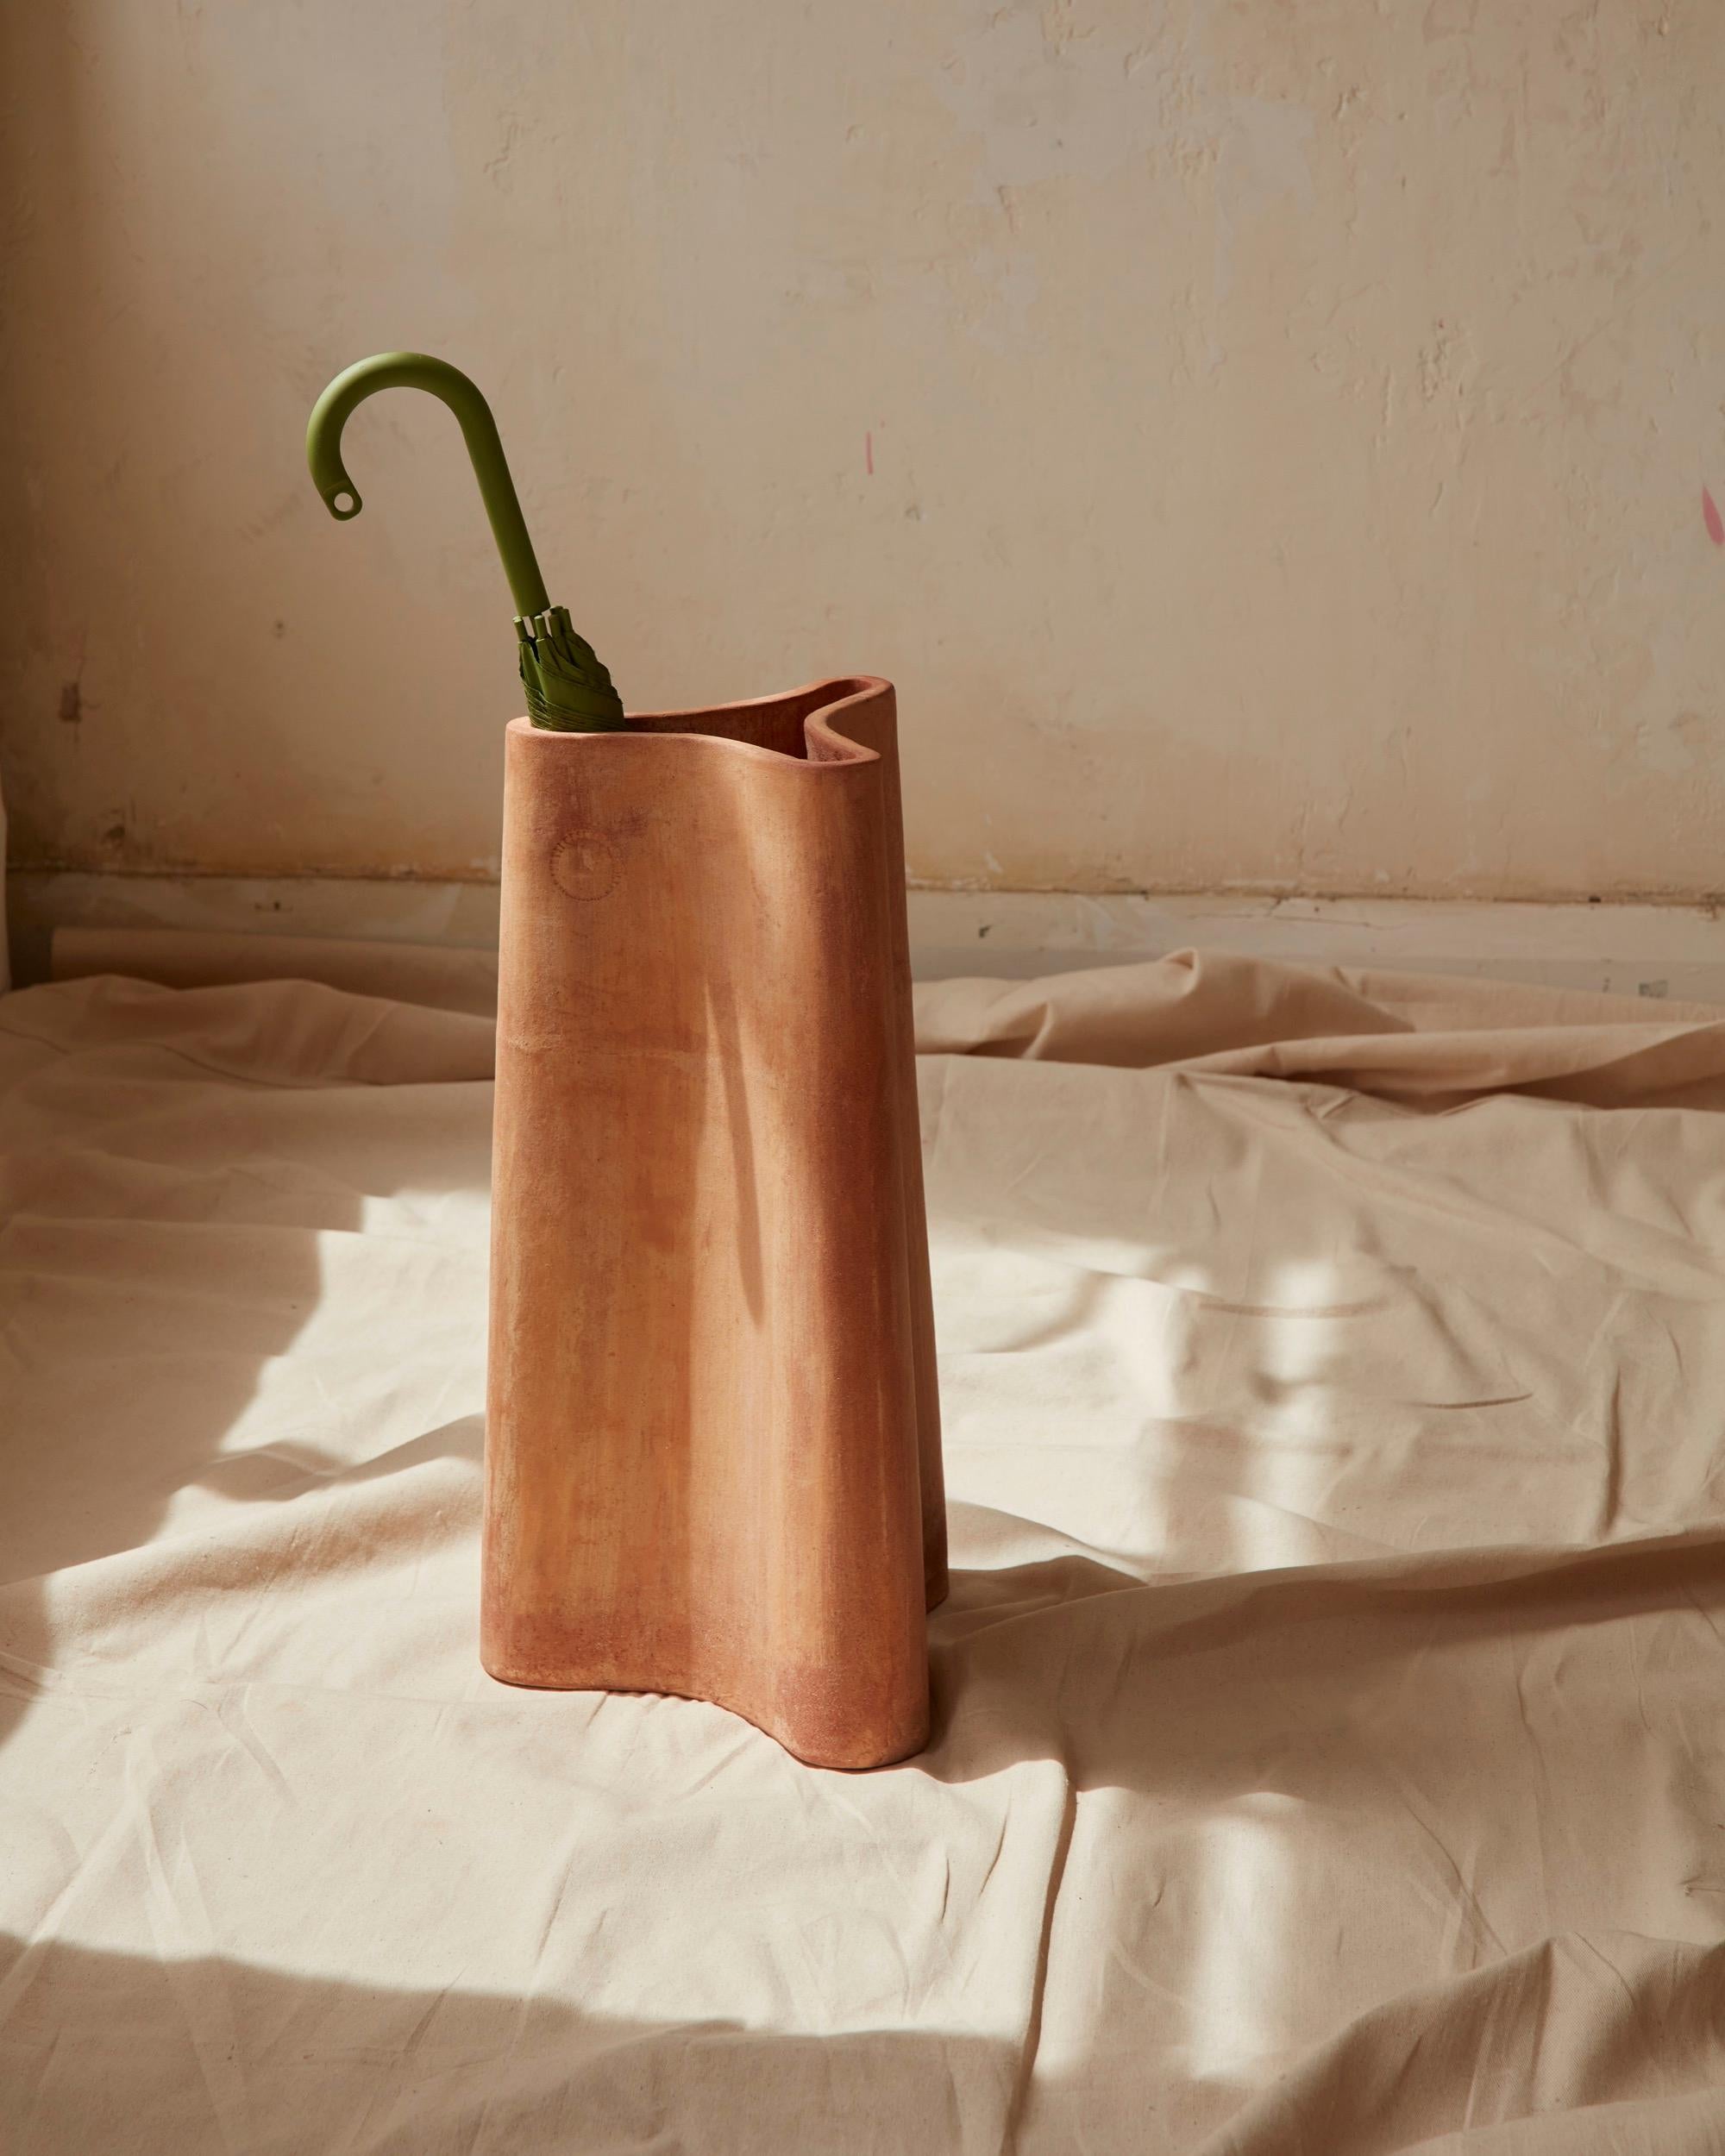 A free-flowing terracotta umbrella holder, inspired by the ribbed oil and water jars of Greece. The three-part, compartment-like form is tapered for stability and form-ribbed for strength.

Included in the range is a smaller vase version, along